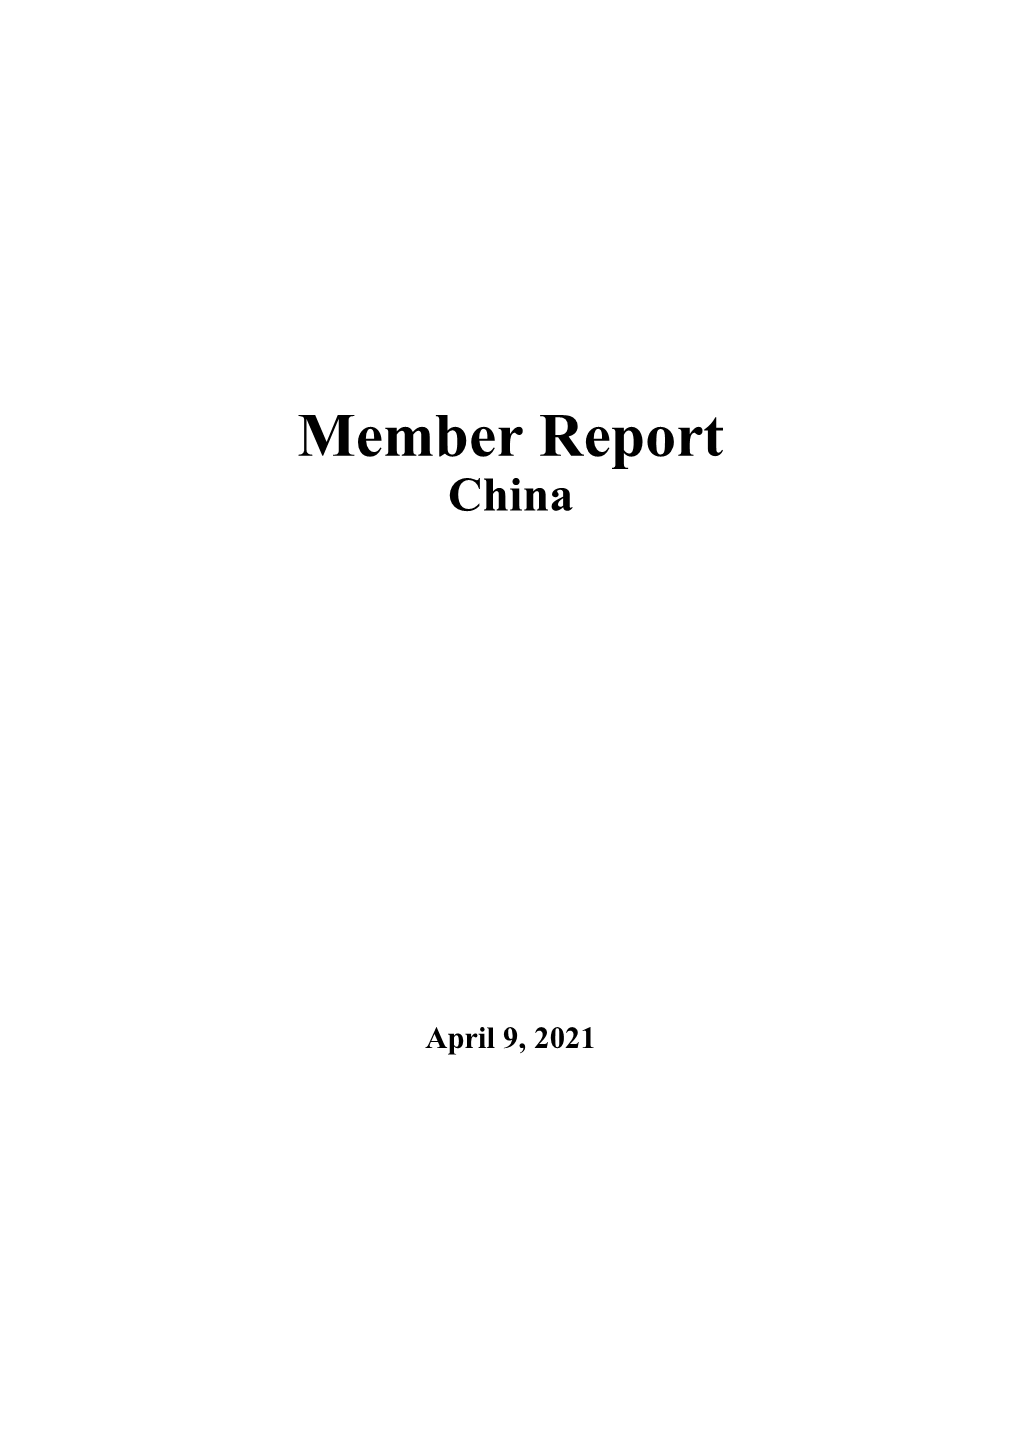 Typhoon Annual Report of China